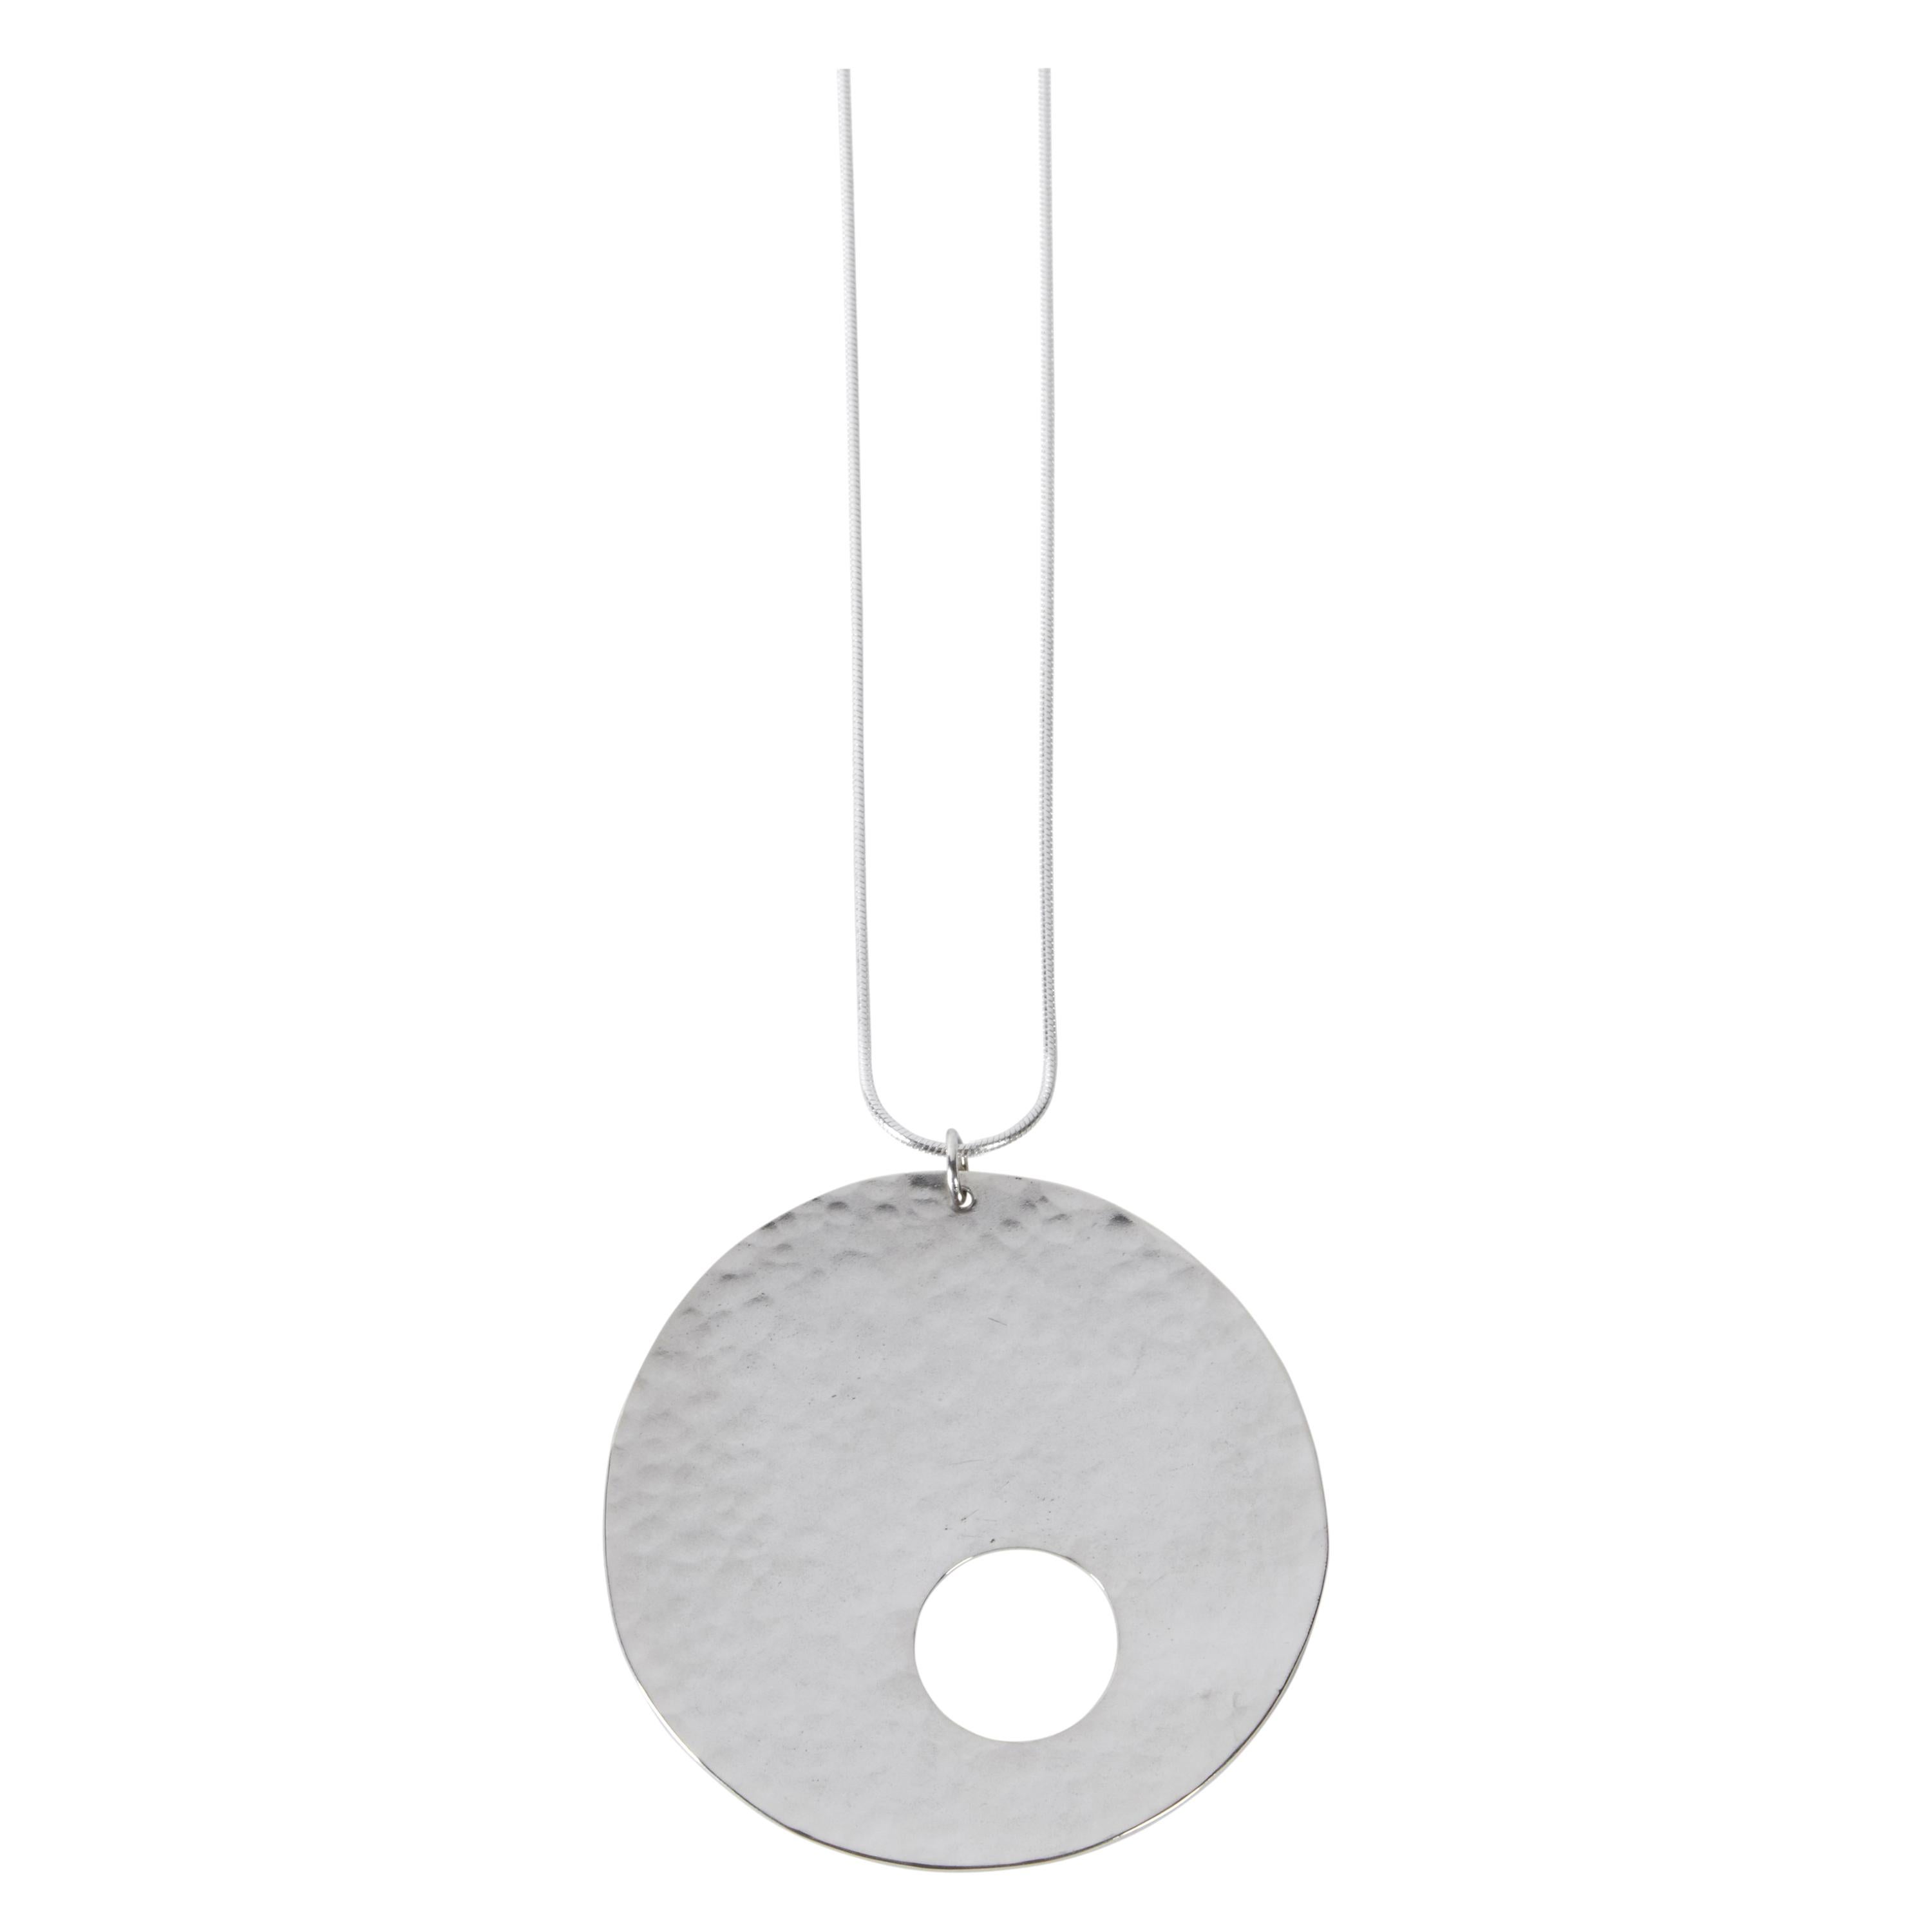 Limited Edition Sterling Silver Gong Style Pendant Designed by Harry Bertoia For Sale